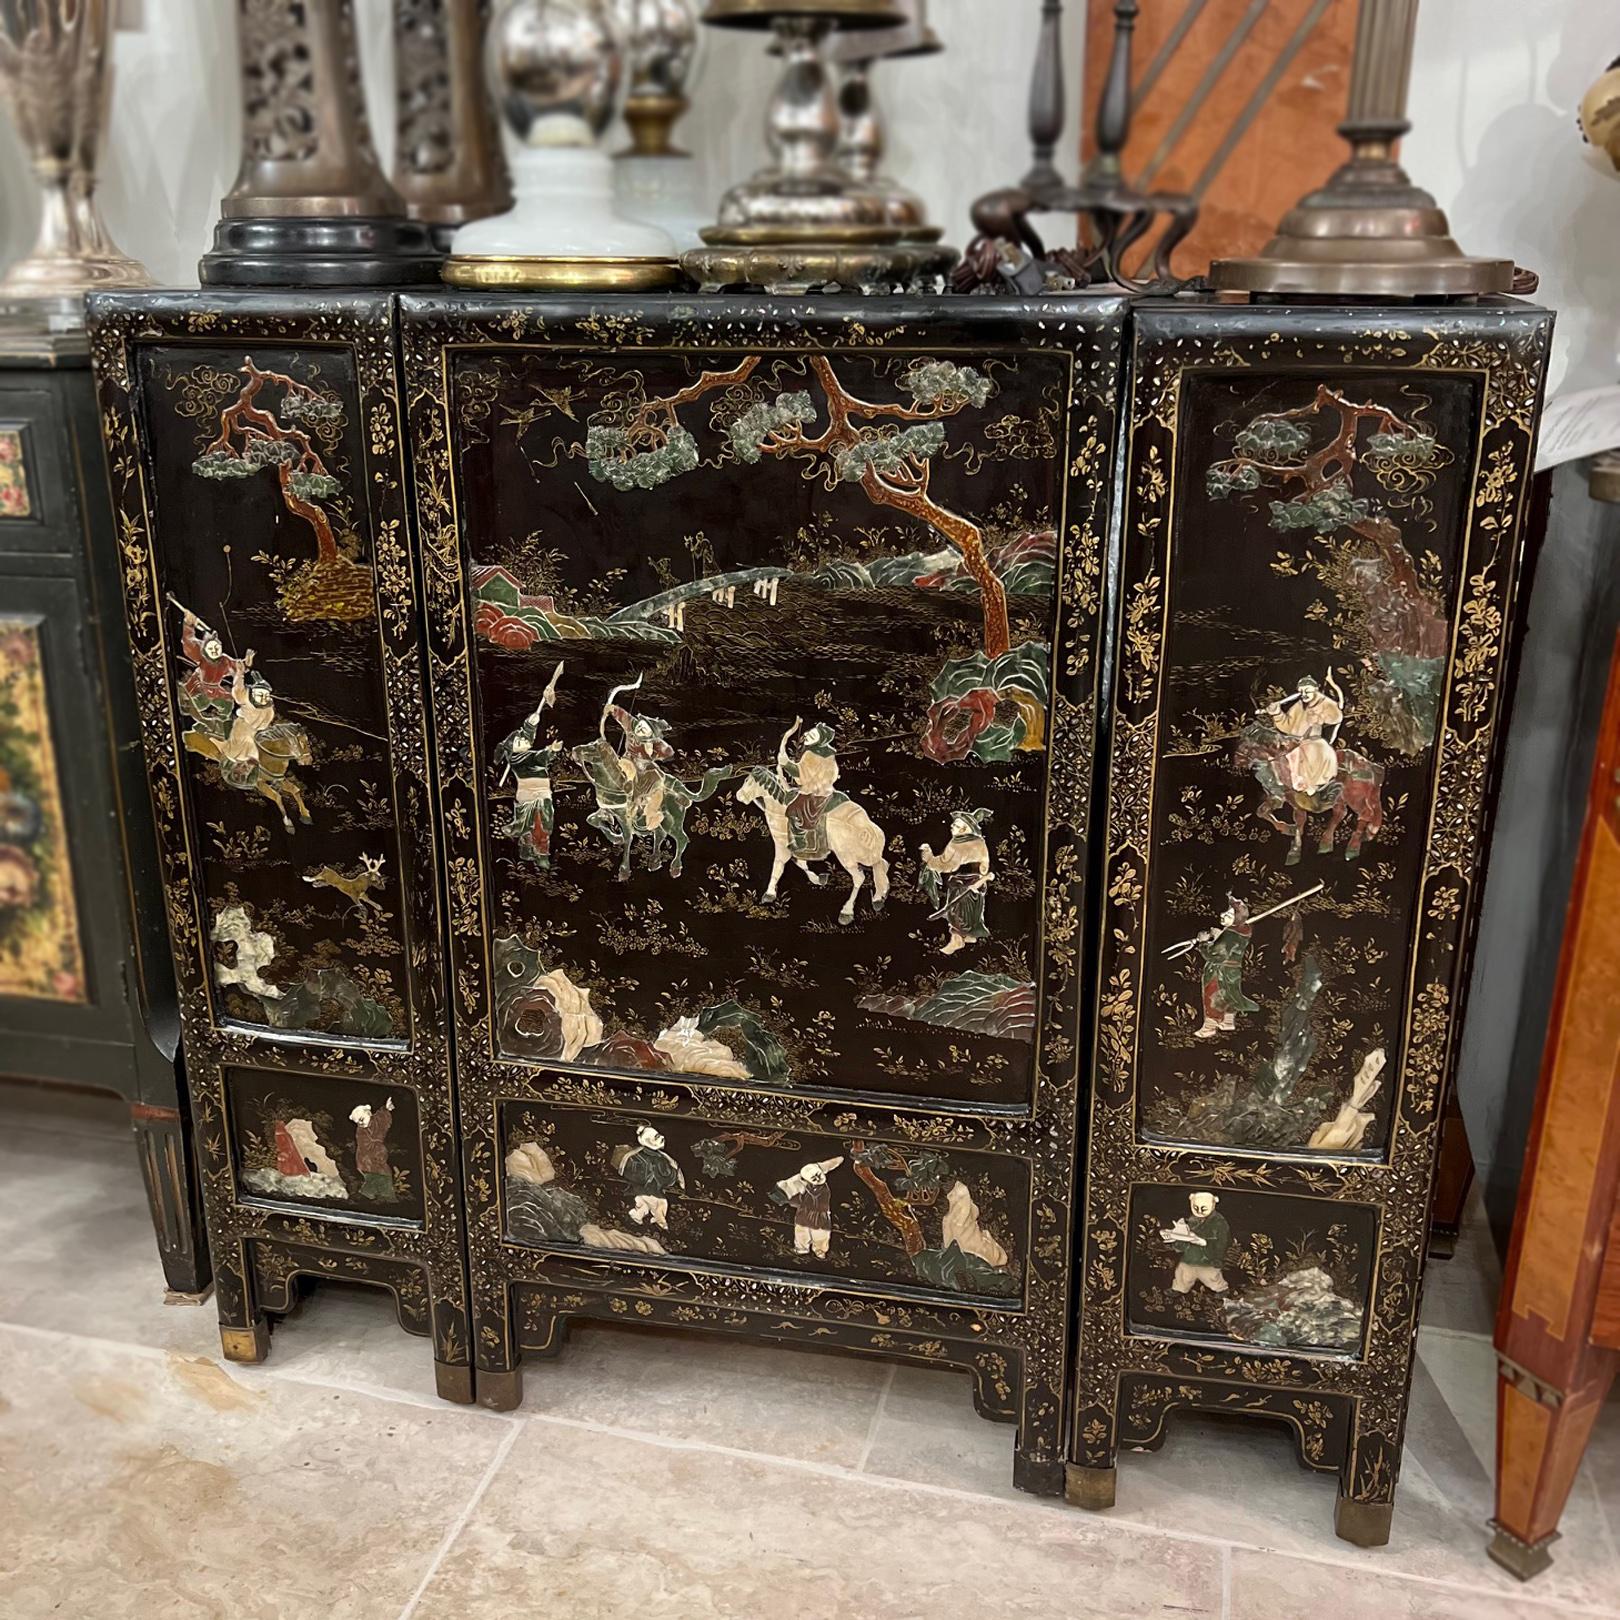 A circa 1920's black-laquered Chinese cabinet with inlayed stone and mother-of-pearl figures.

Measurements:
Height: 36